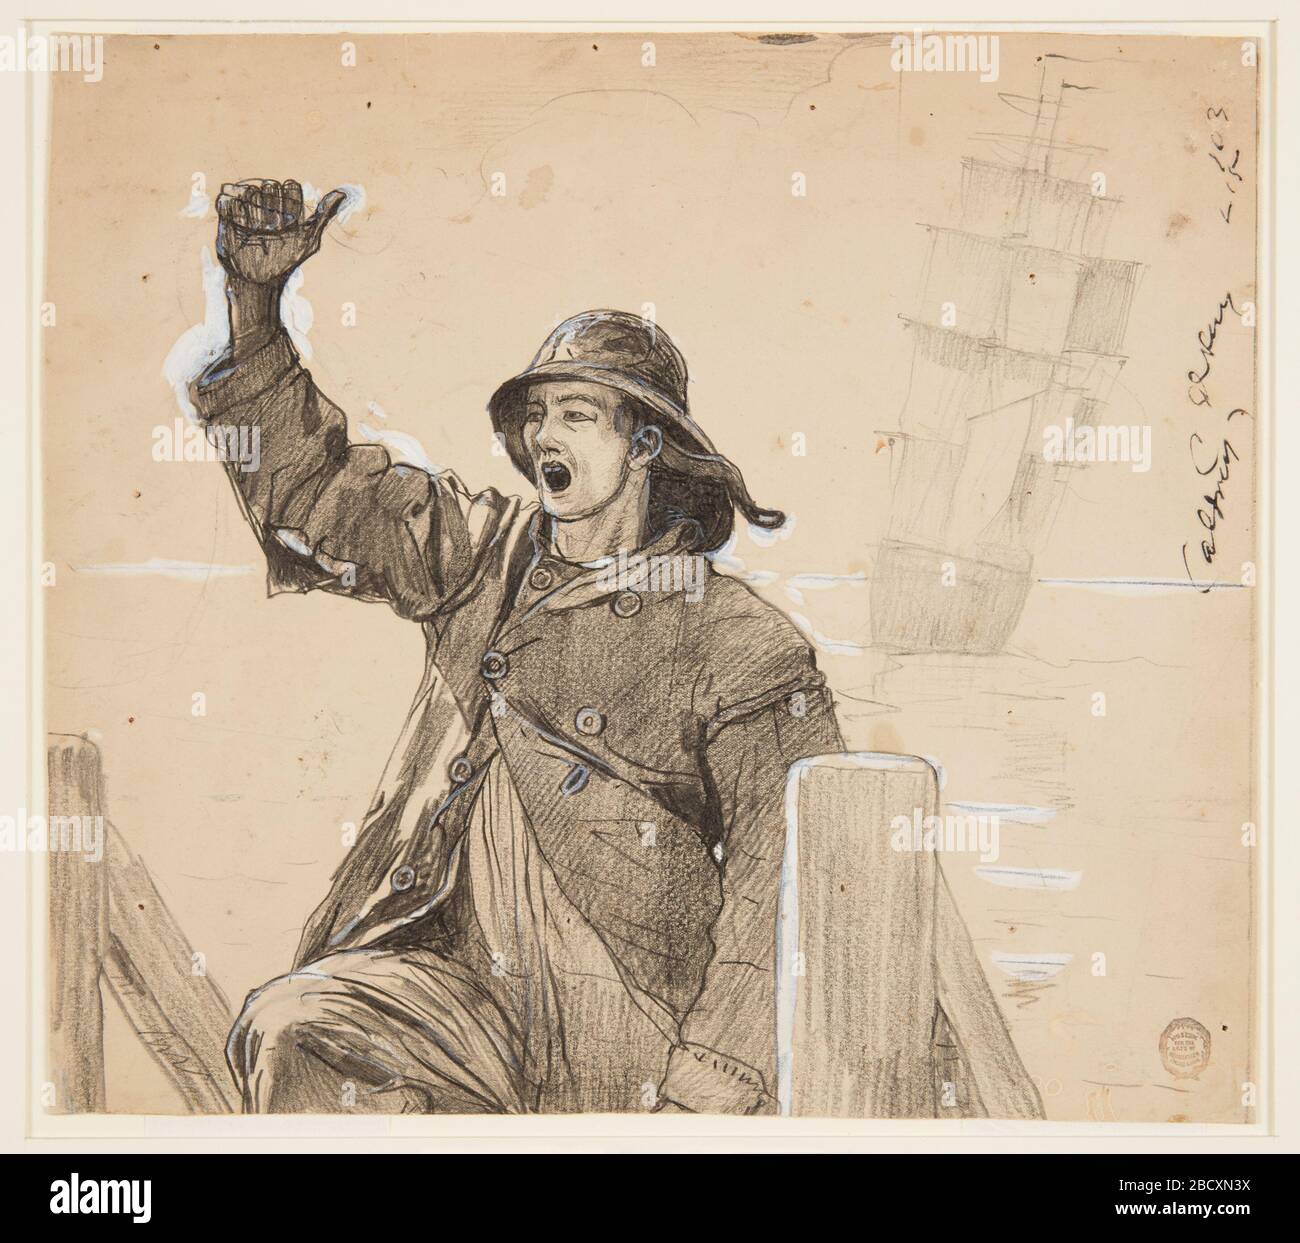 The Lookout. Research in ProgressHoriontal view of a sailor in sou'wester, mounting a companionway, with his right arm upraised; a sailing vessel in background. The Lookout Stock Photo